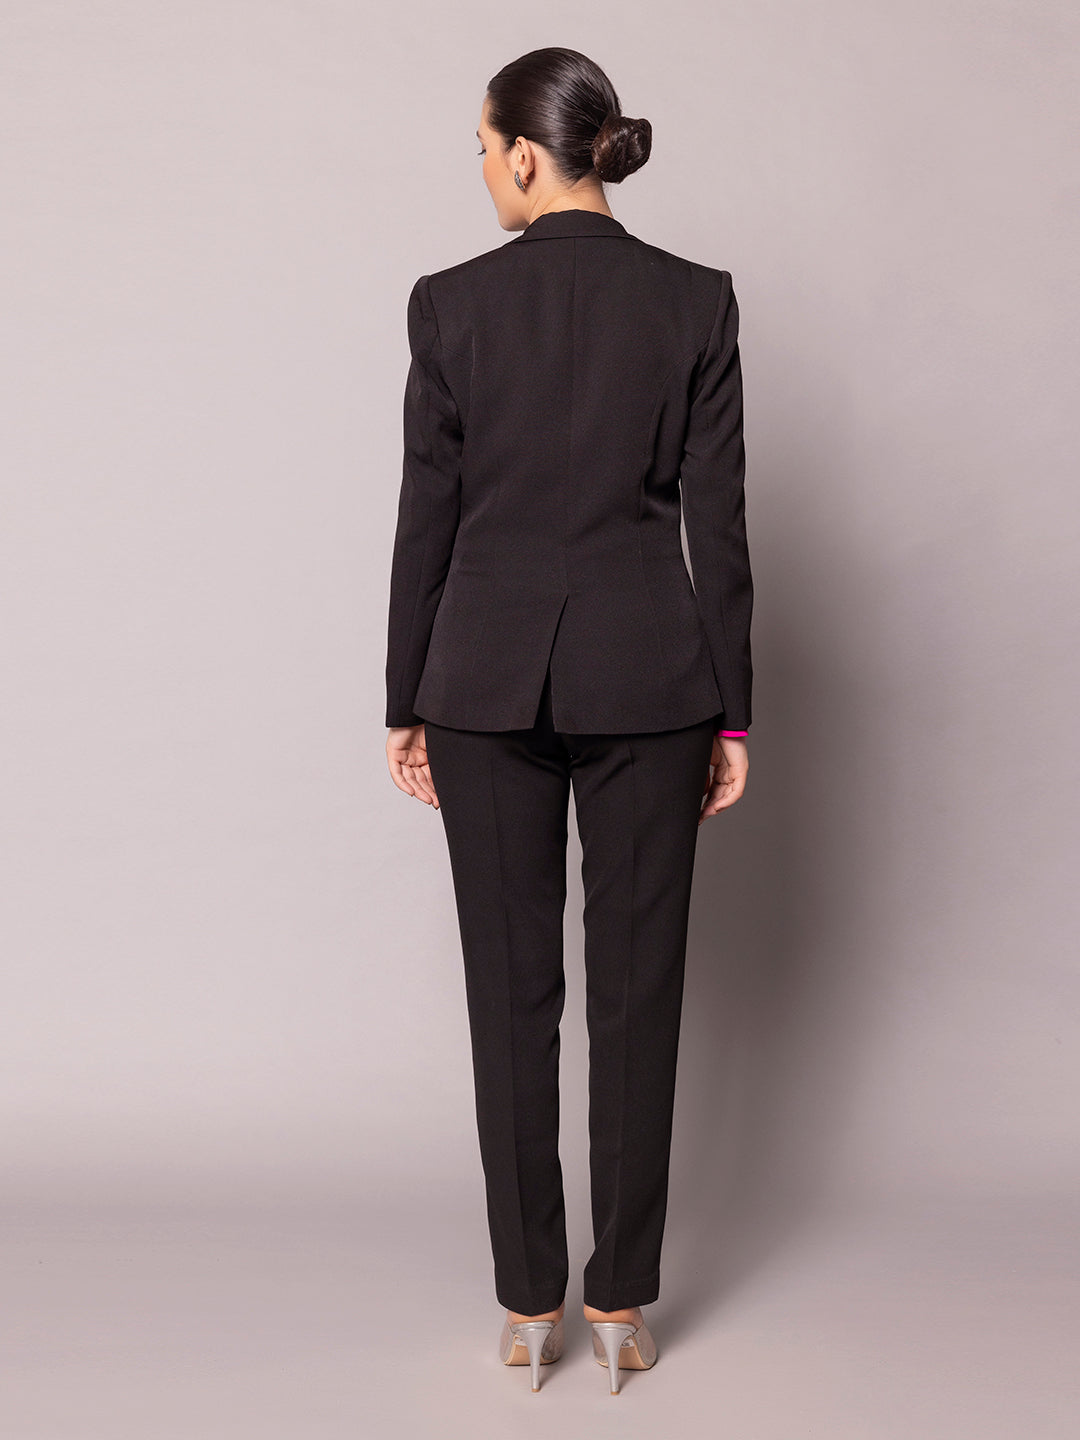 Black Polyester Stretch Pant Suit